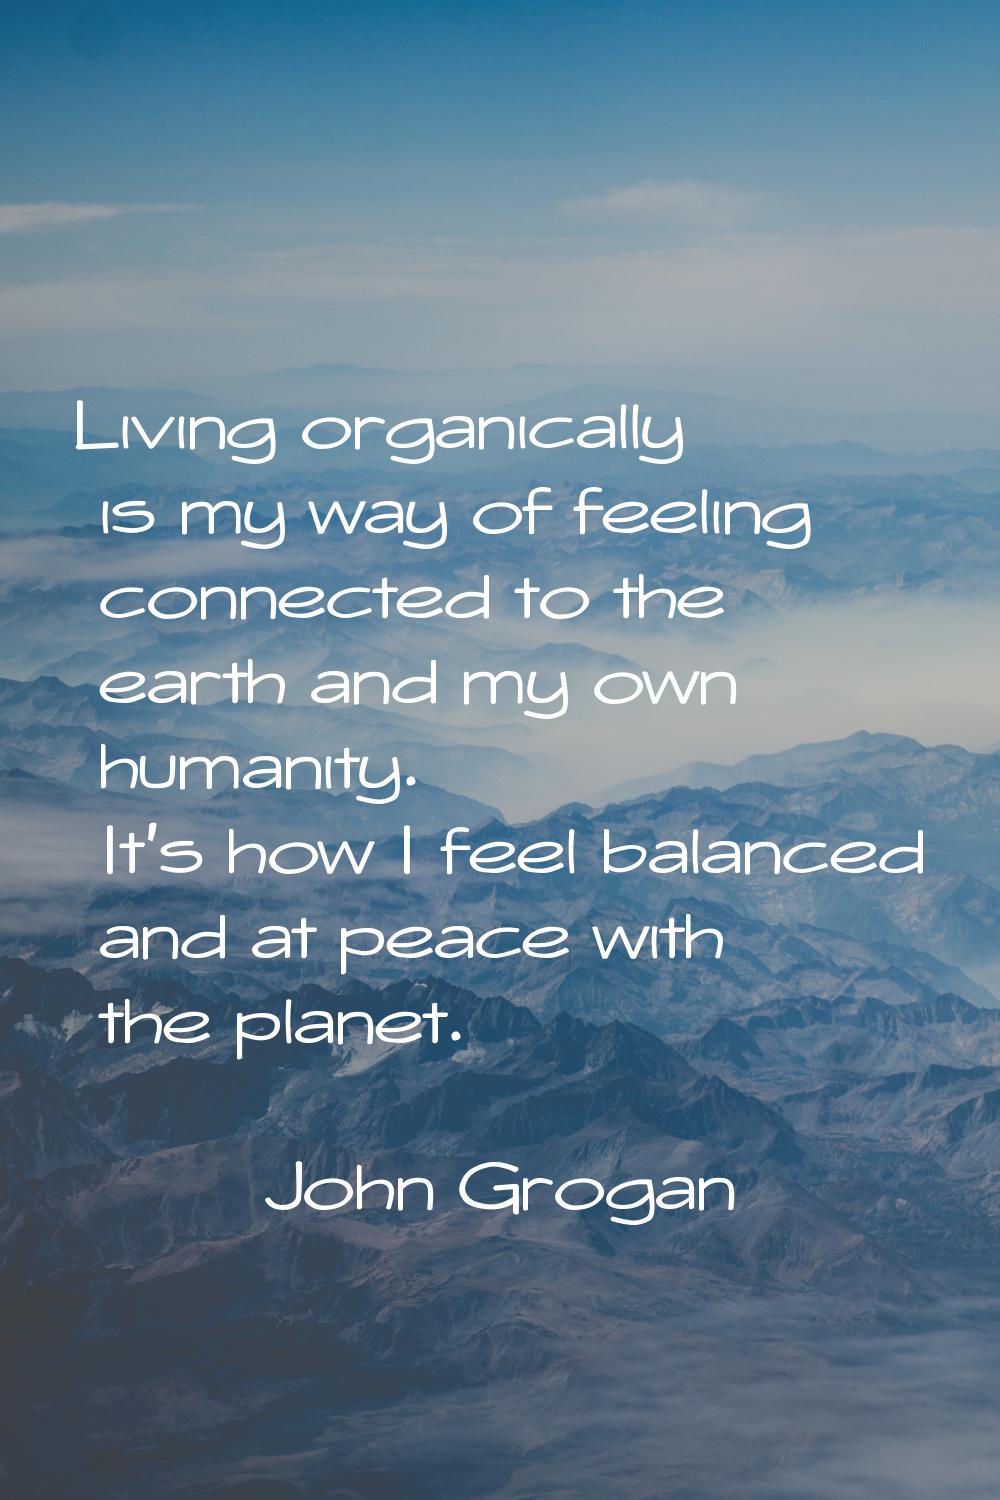 Living organically is my way of feeling connected to the earth and my own humanity. It's how I feel